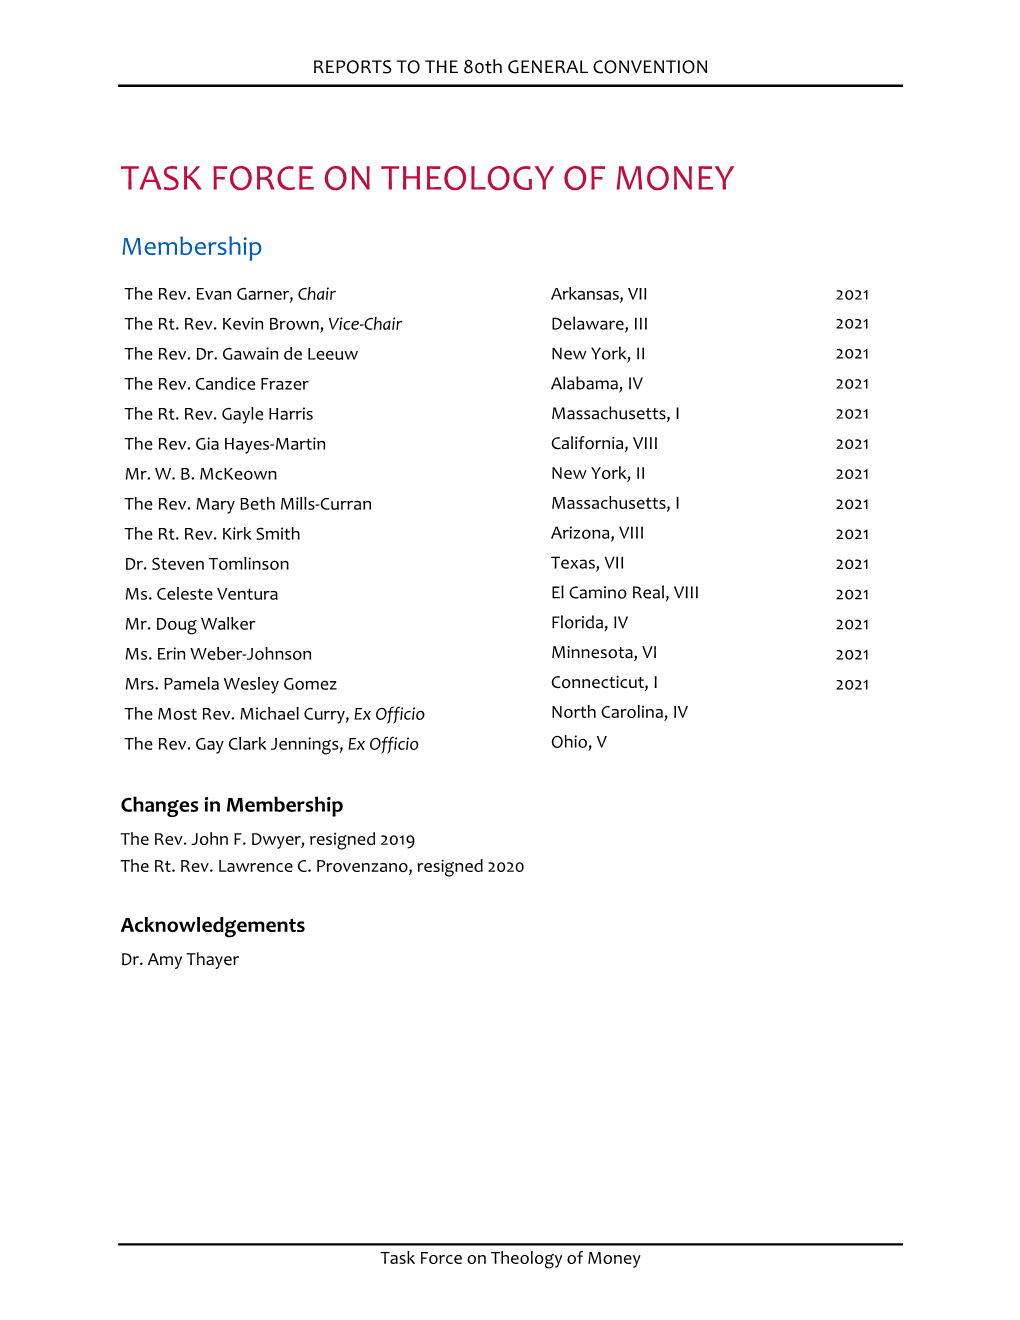 Investing As Doing Theology" Report Which Can Be Found in the Supplemental Materials Section of This Report